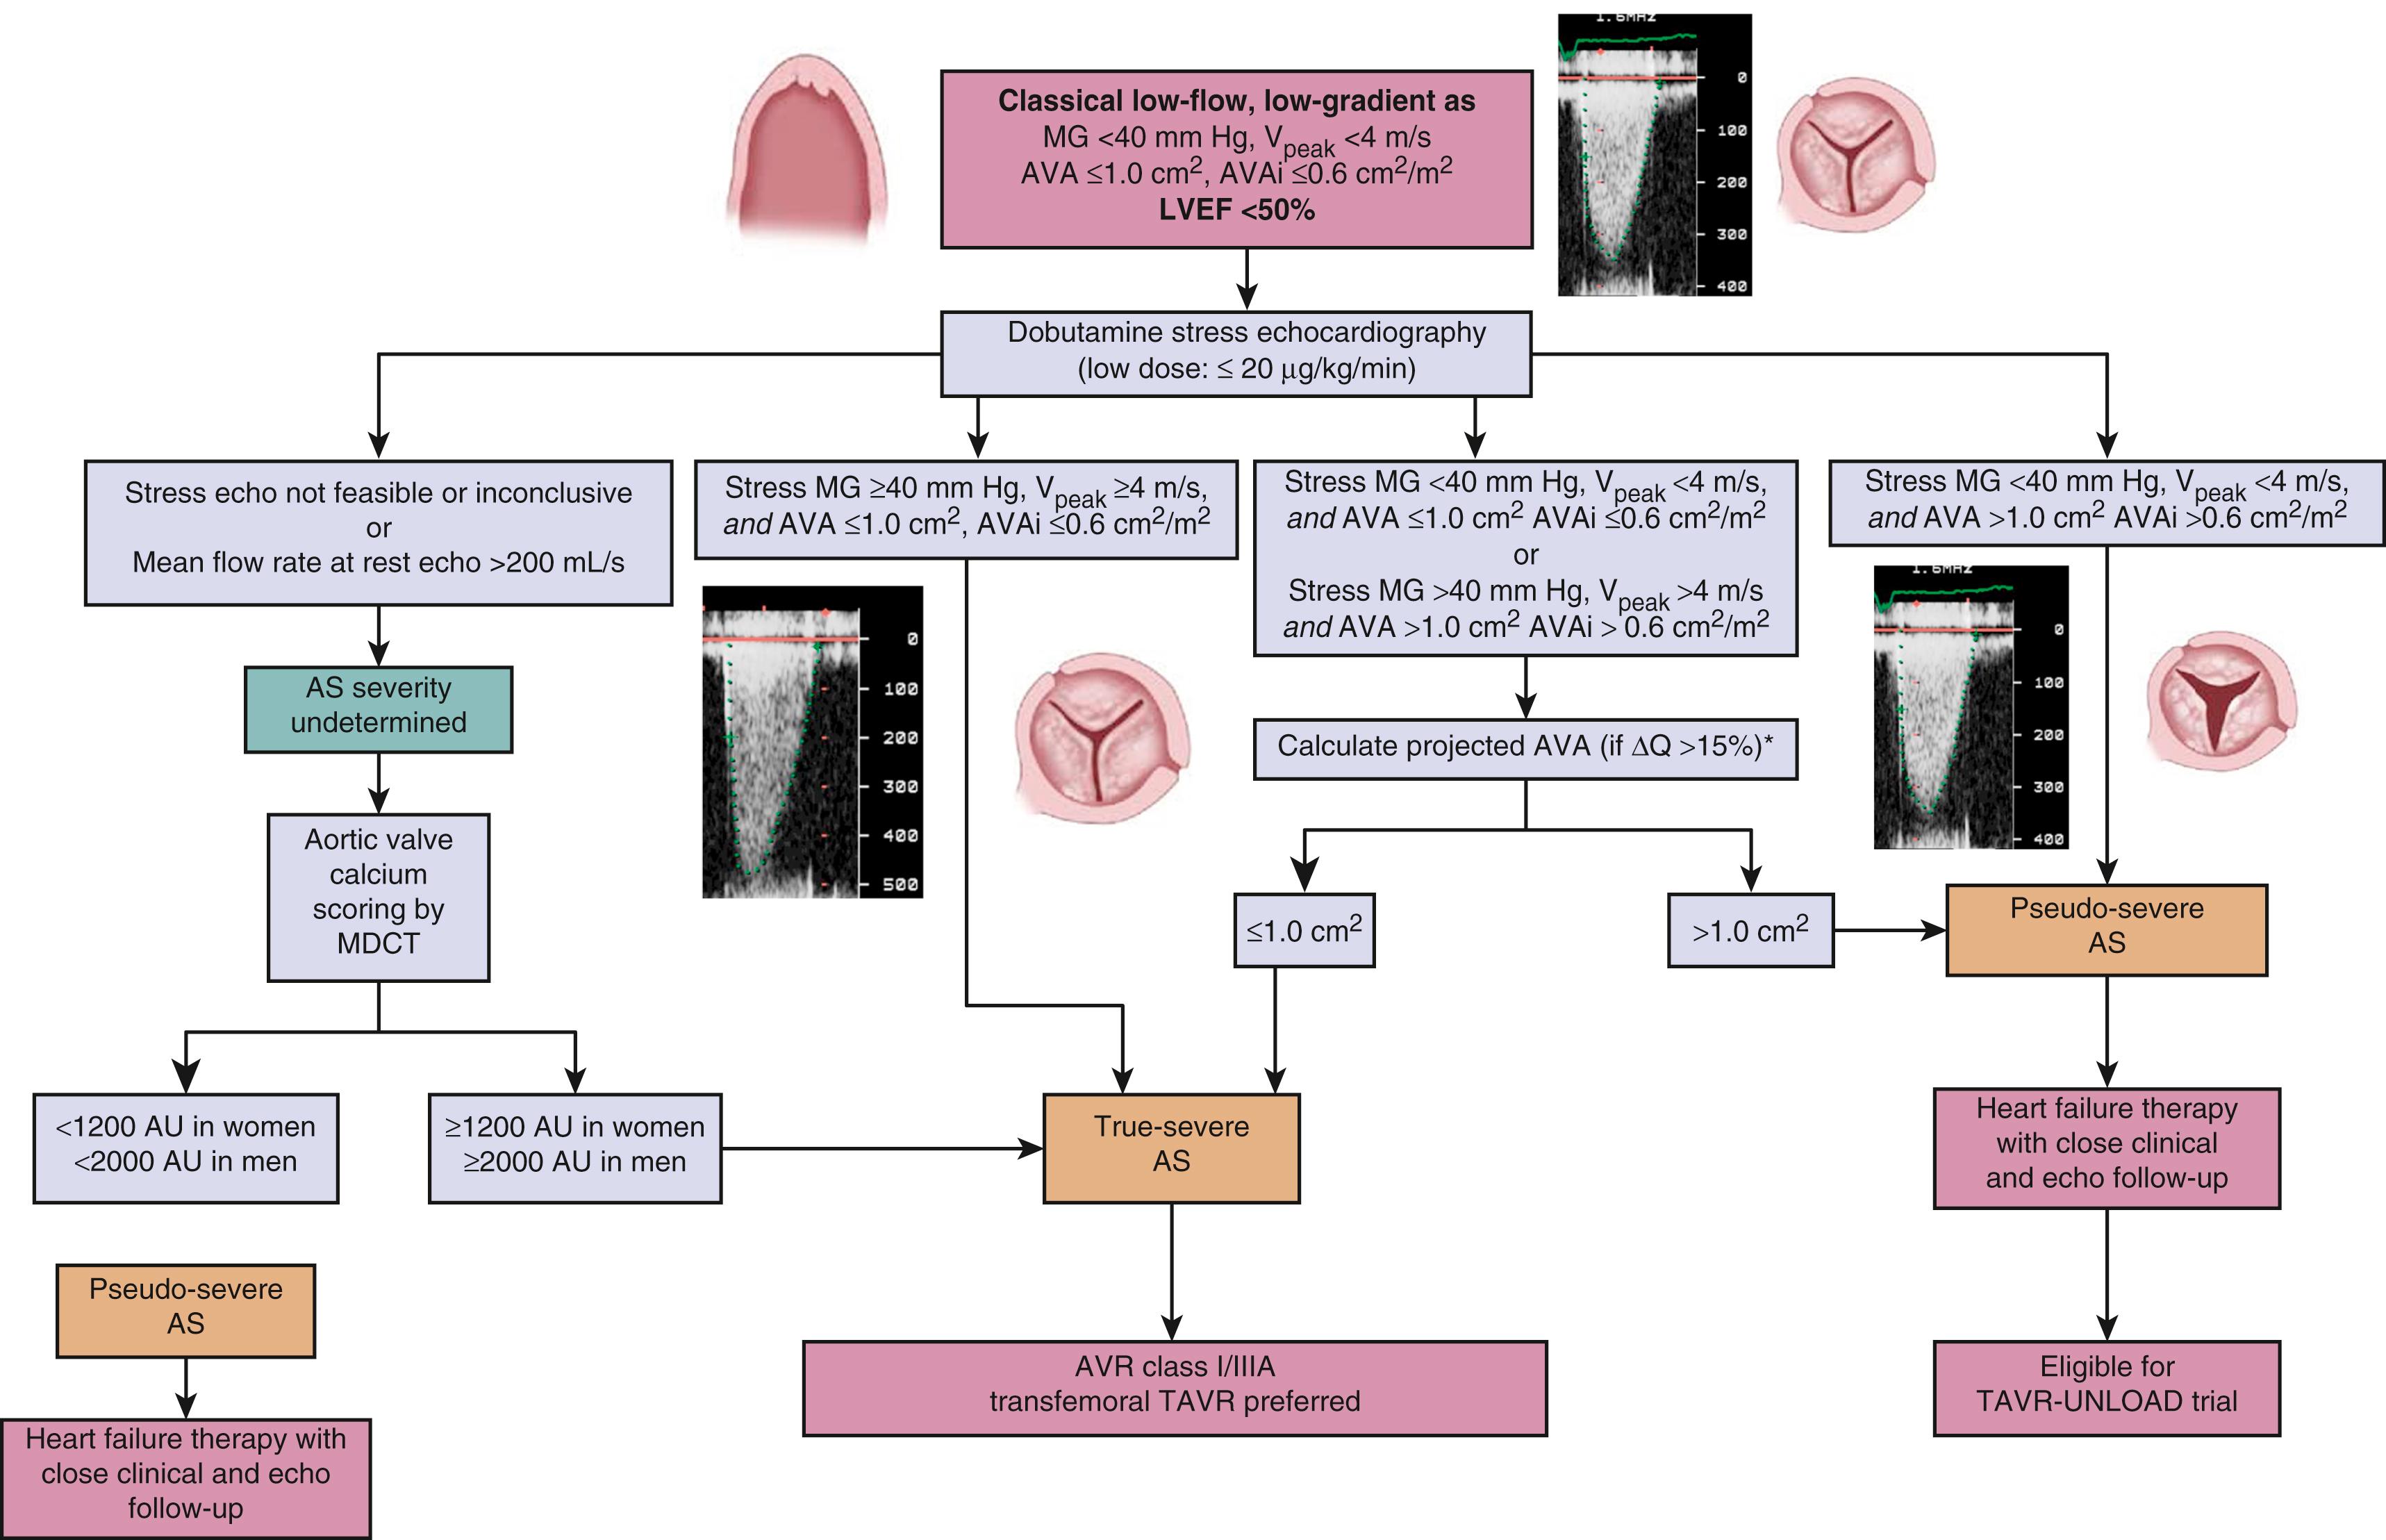 Figure 82.1, Algorithm for the diagnostic and therapeutic management of patients with low-flow, low-gradient aortic stenosis and reduced left ventricular ejection fraction (LVEF). AU, Arbitrary unit using the Agatston calcium scoring method; AVA, aortic valve area; AVR, aortic valve replacement; MG, mean transvalvular gradient; projected AVA, projected aortic valve area at normal flow rate (250 mL/s); MDCT, multidetector computed tomography; TAVR, transcatheter aortic valve replacement; TAVR-UNLOAD trial, Transcatheter Aortic Valve Replacement to UNload the Left Ventricle in Patients With ADvanced Heart Failure randomized trial; ΔQ, relative increase in mean flow rate (stroke volume/left ventricular ejection time); V Peak , peak transvalvular velocity.